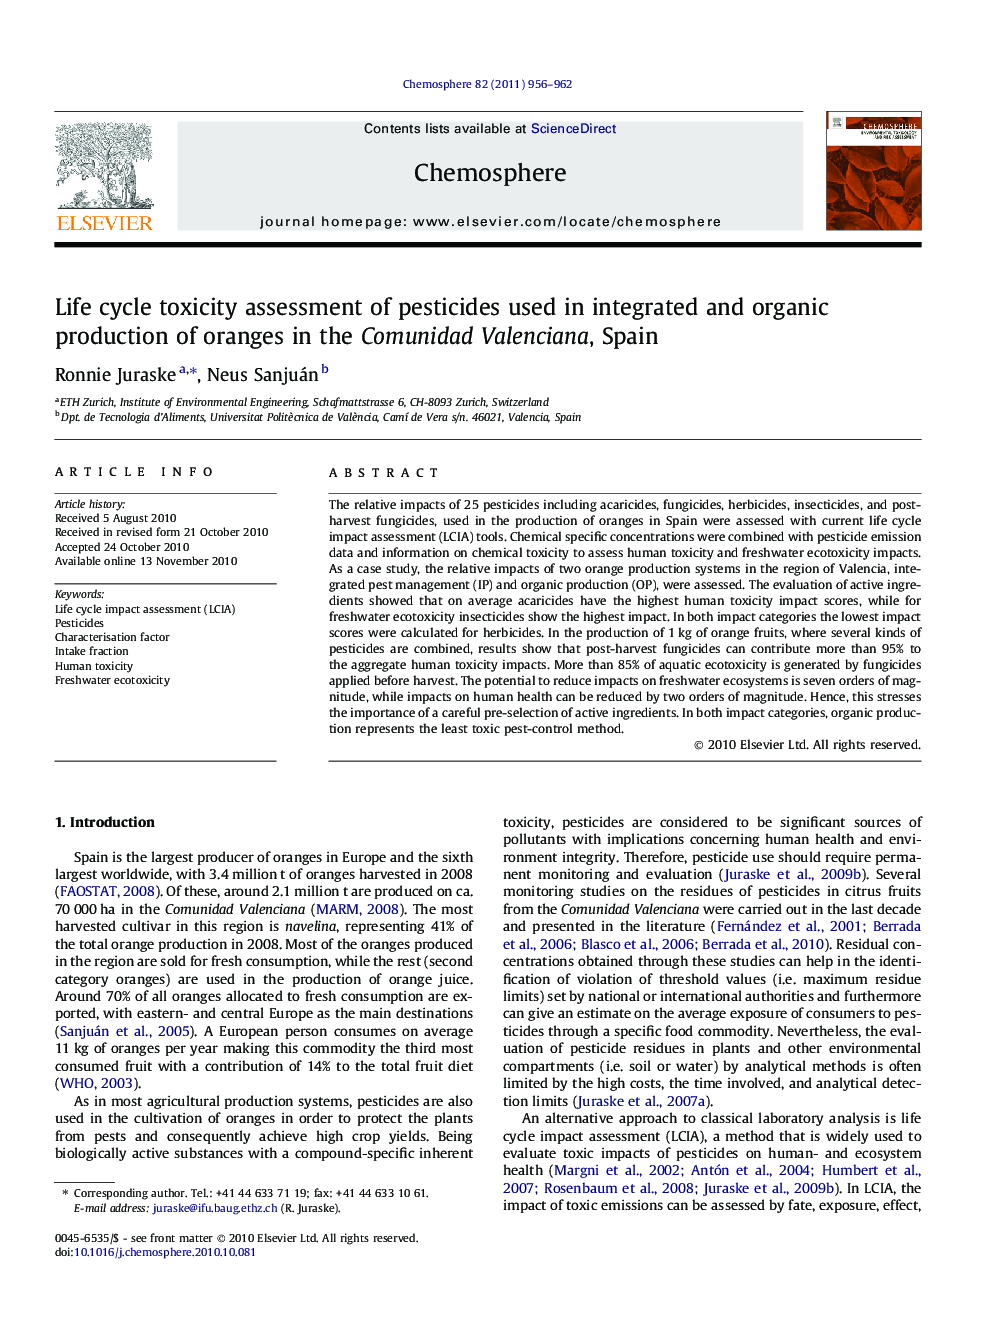 Life cycle toxicity assessment of pesticides used in integrated and organic production of oranges in the Comunidad Valenciana, Spain